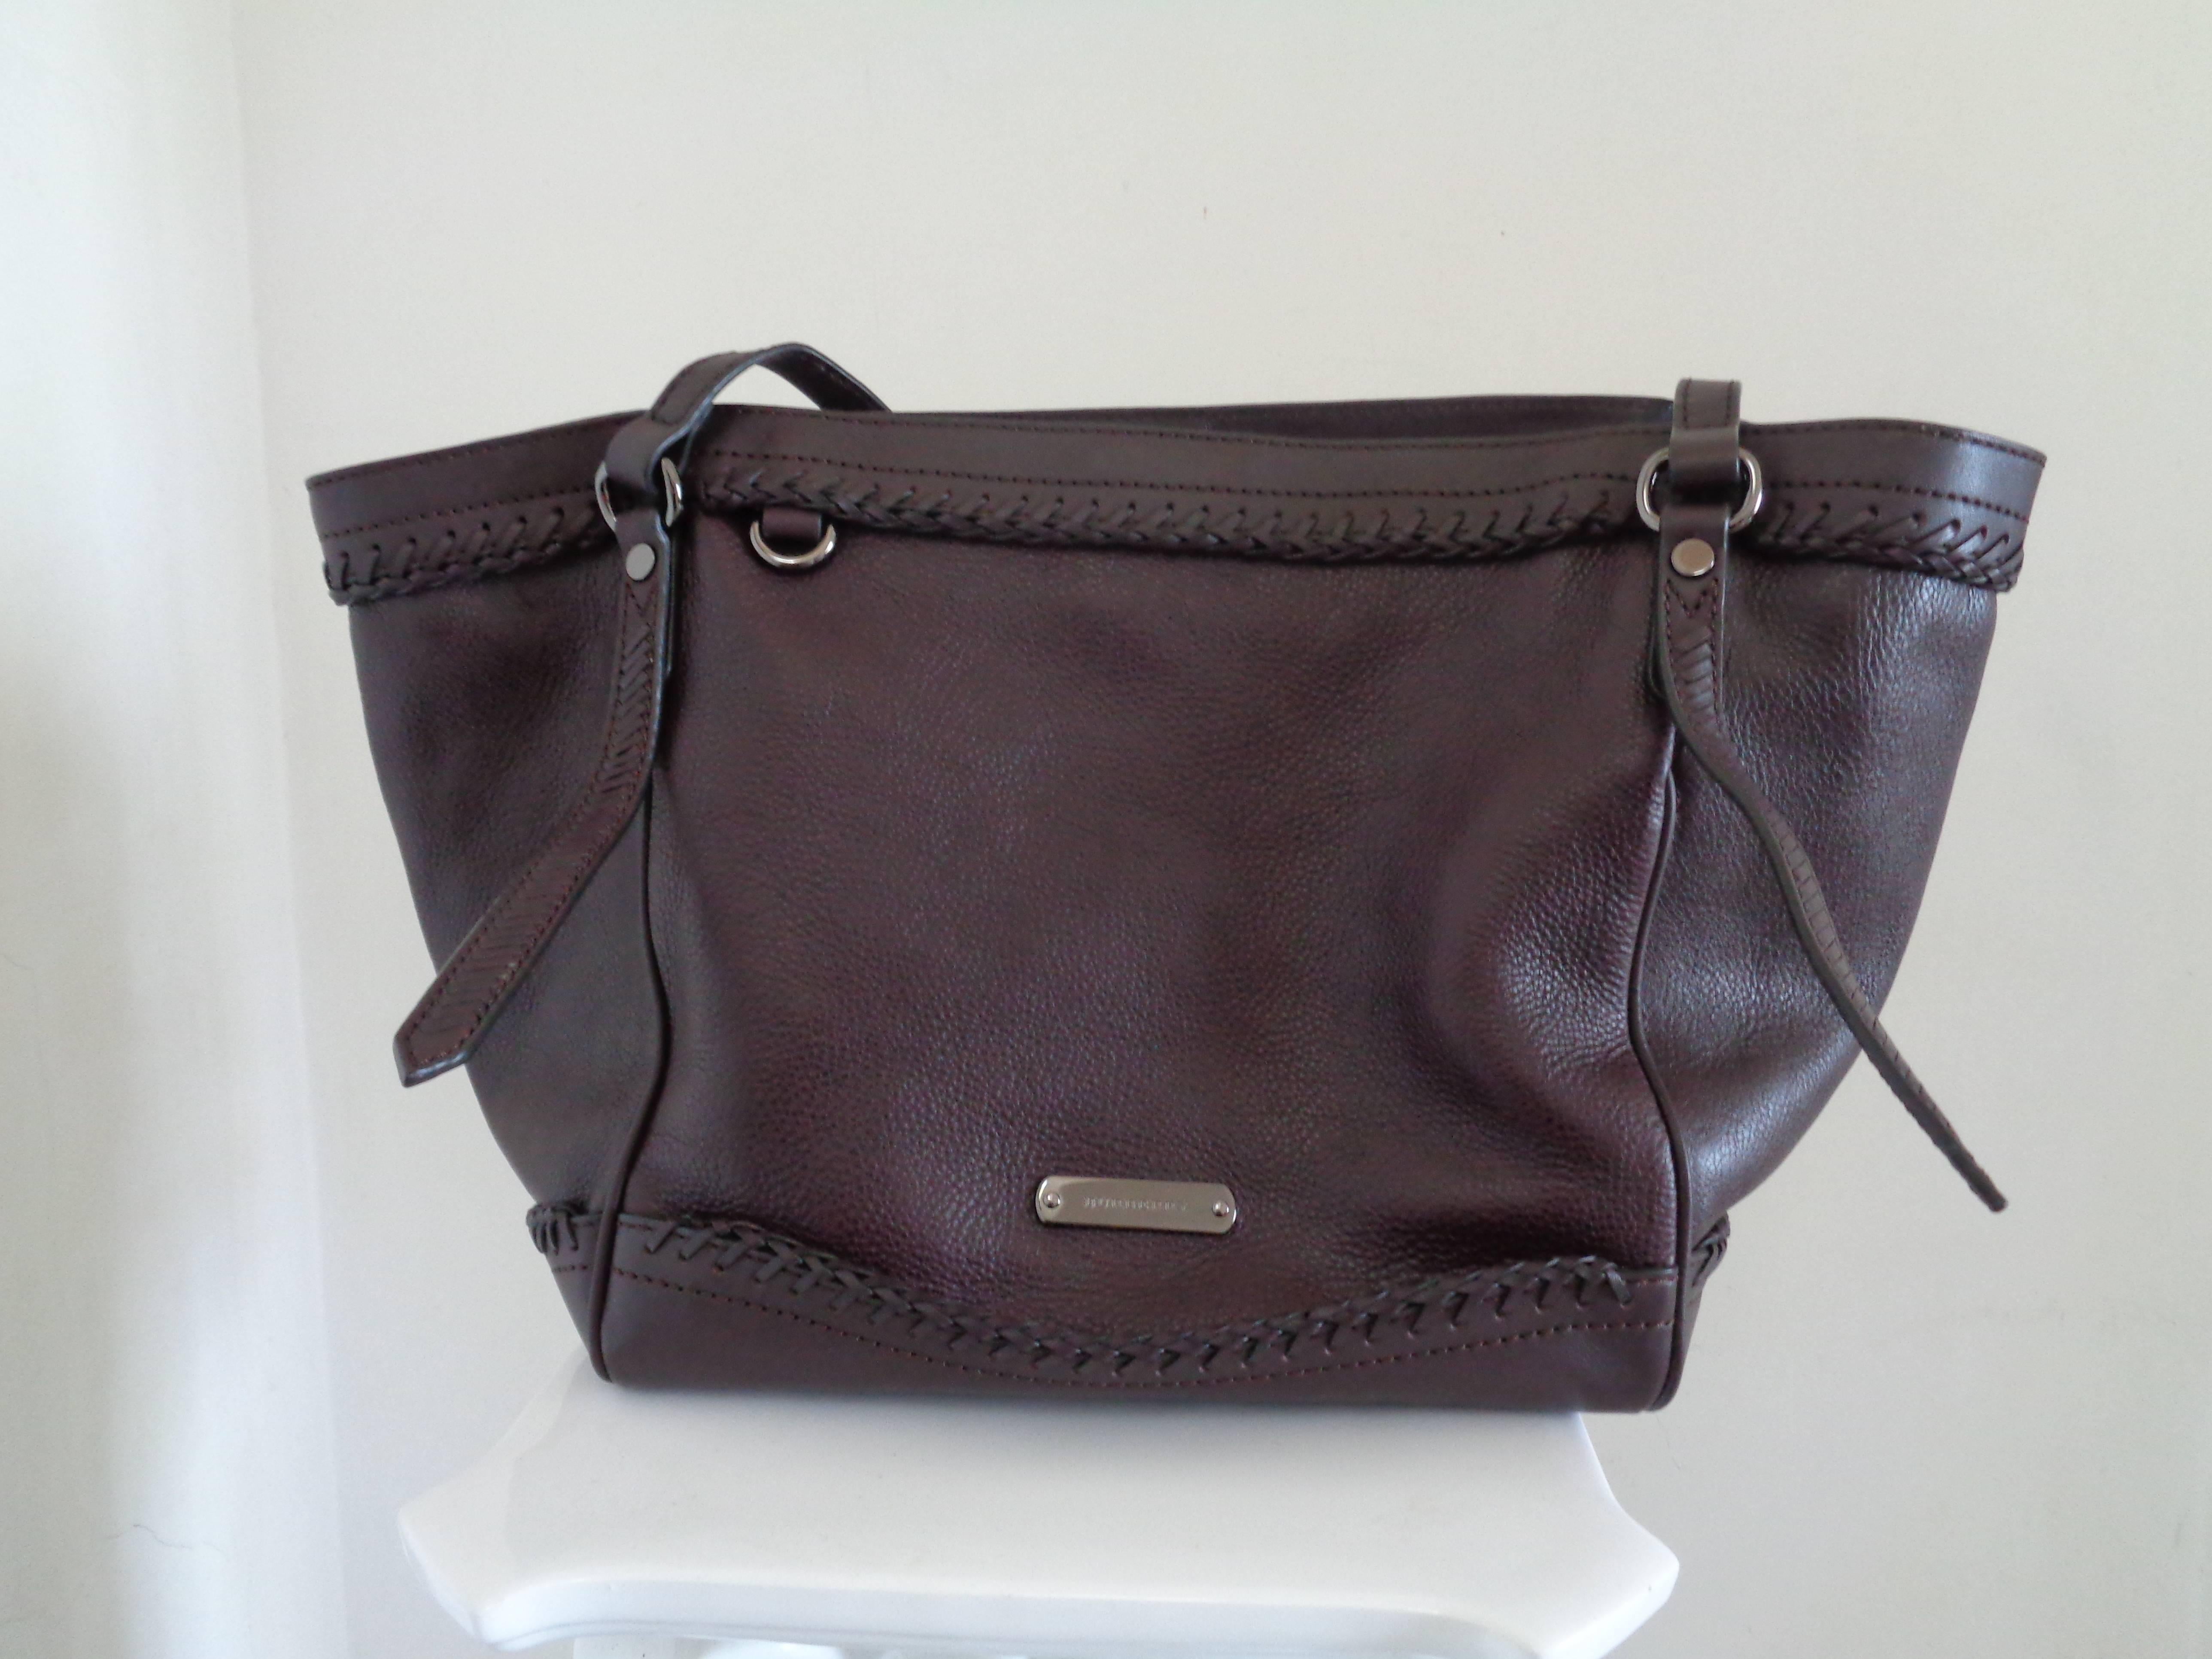 Burberry Dark Brown Leather Shoulder Bag

Totally made with calf leatheri n China by Burberry still with tags